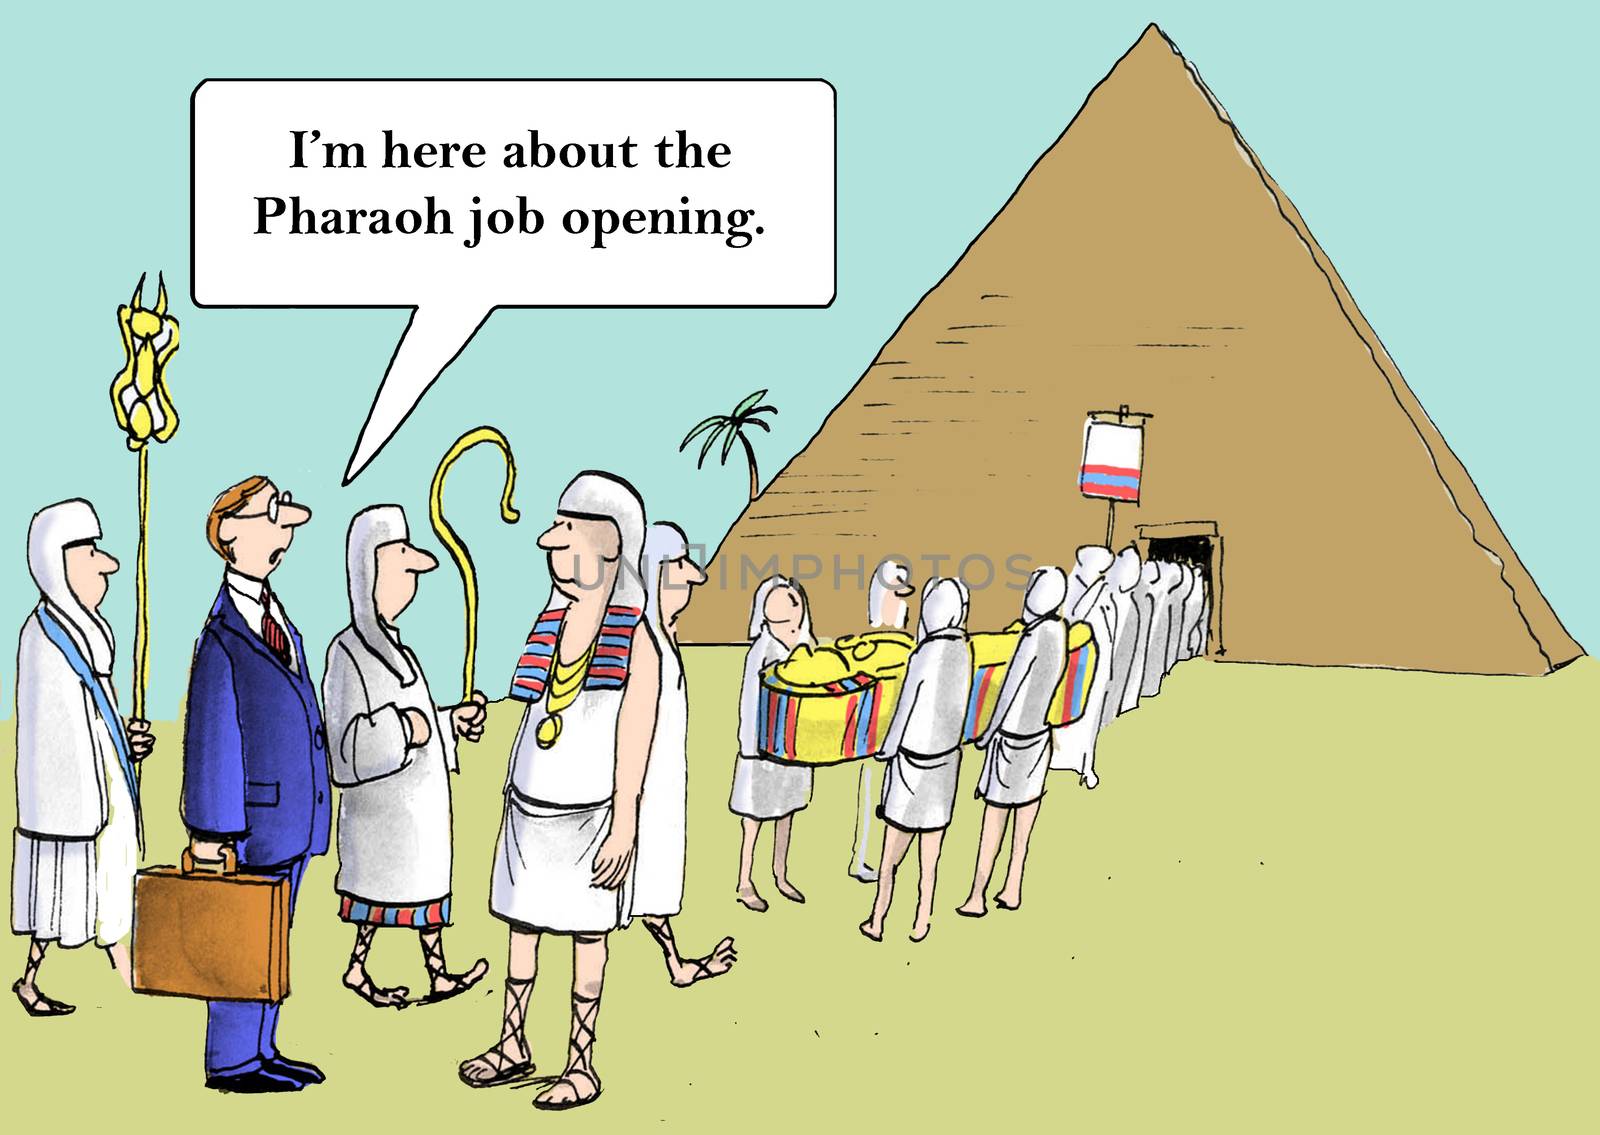 "I'm sure the Pharaoh was a great guy, but I've got my own leadership style."